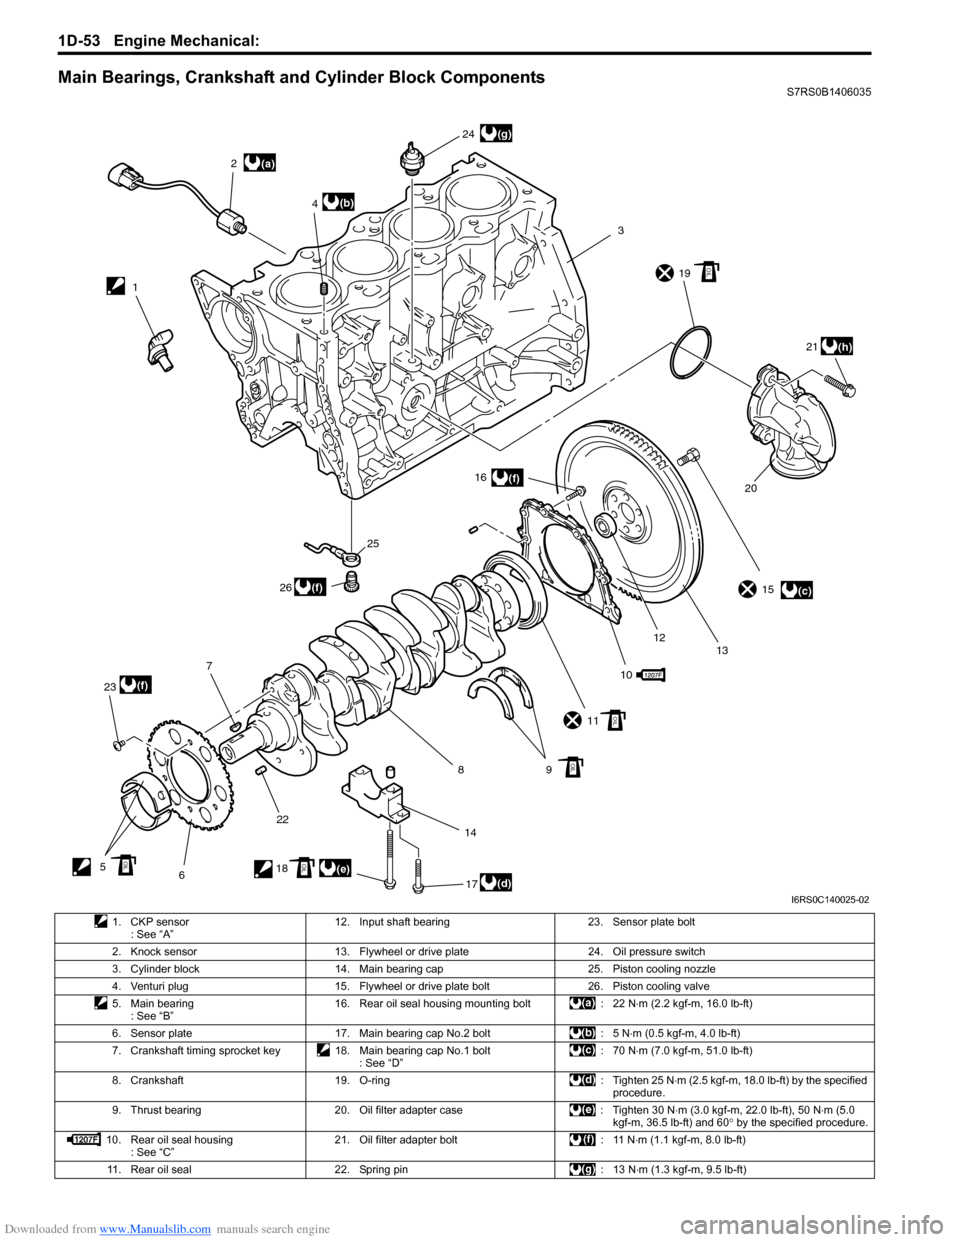 SUZUKI SWIFT 2007 2.G Service Workshop Manual Downloaded from www.Manualslib.com manuals search engine 1D-53 Engine Mechanical: 
Main Bearings, Crankshaft and Cylinder Block ComponentsS7RS0B1406035
(a)
(c)
(d)(e)
(b)
(f)
(f)
(f)
(g)
(h)
12
3
4
5 